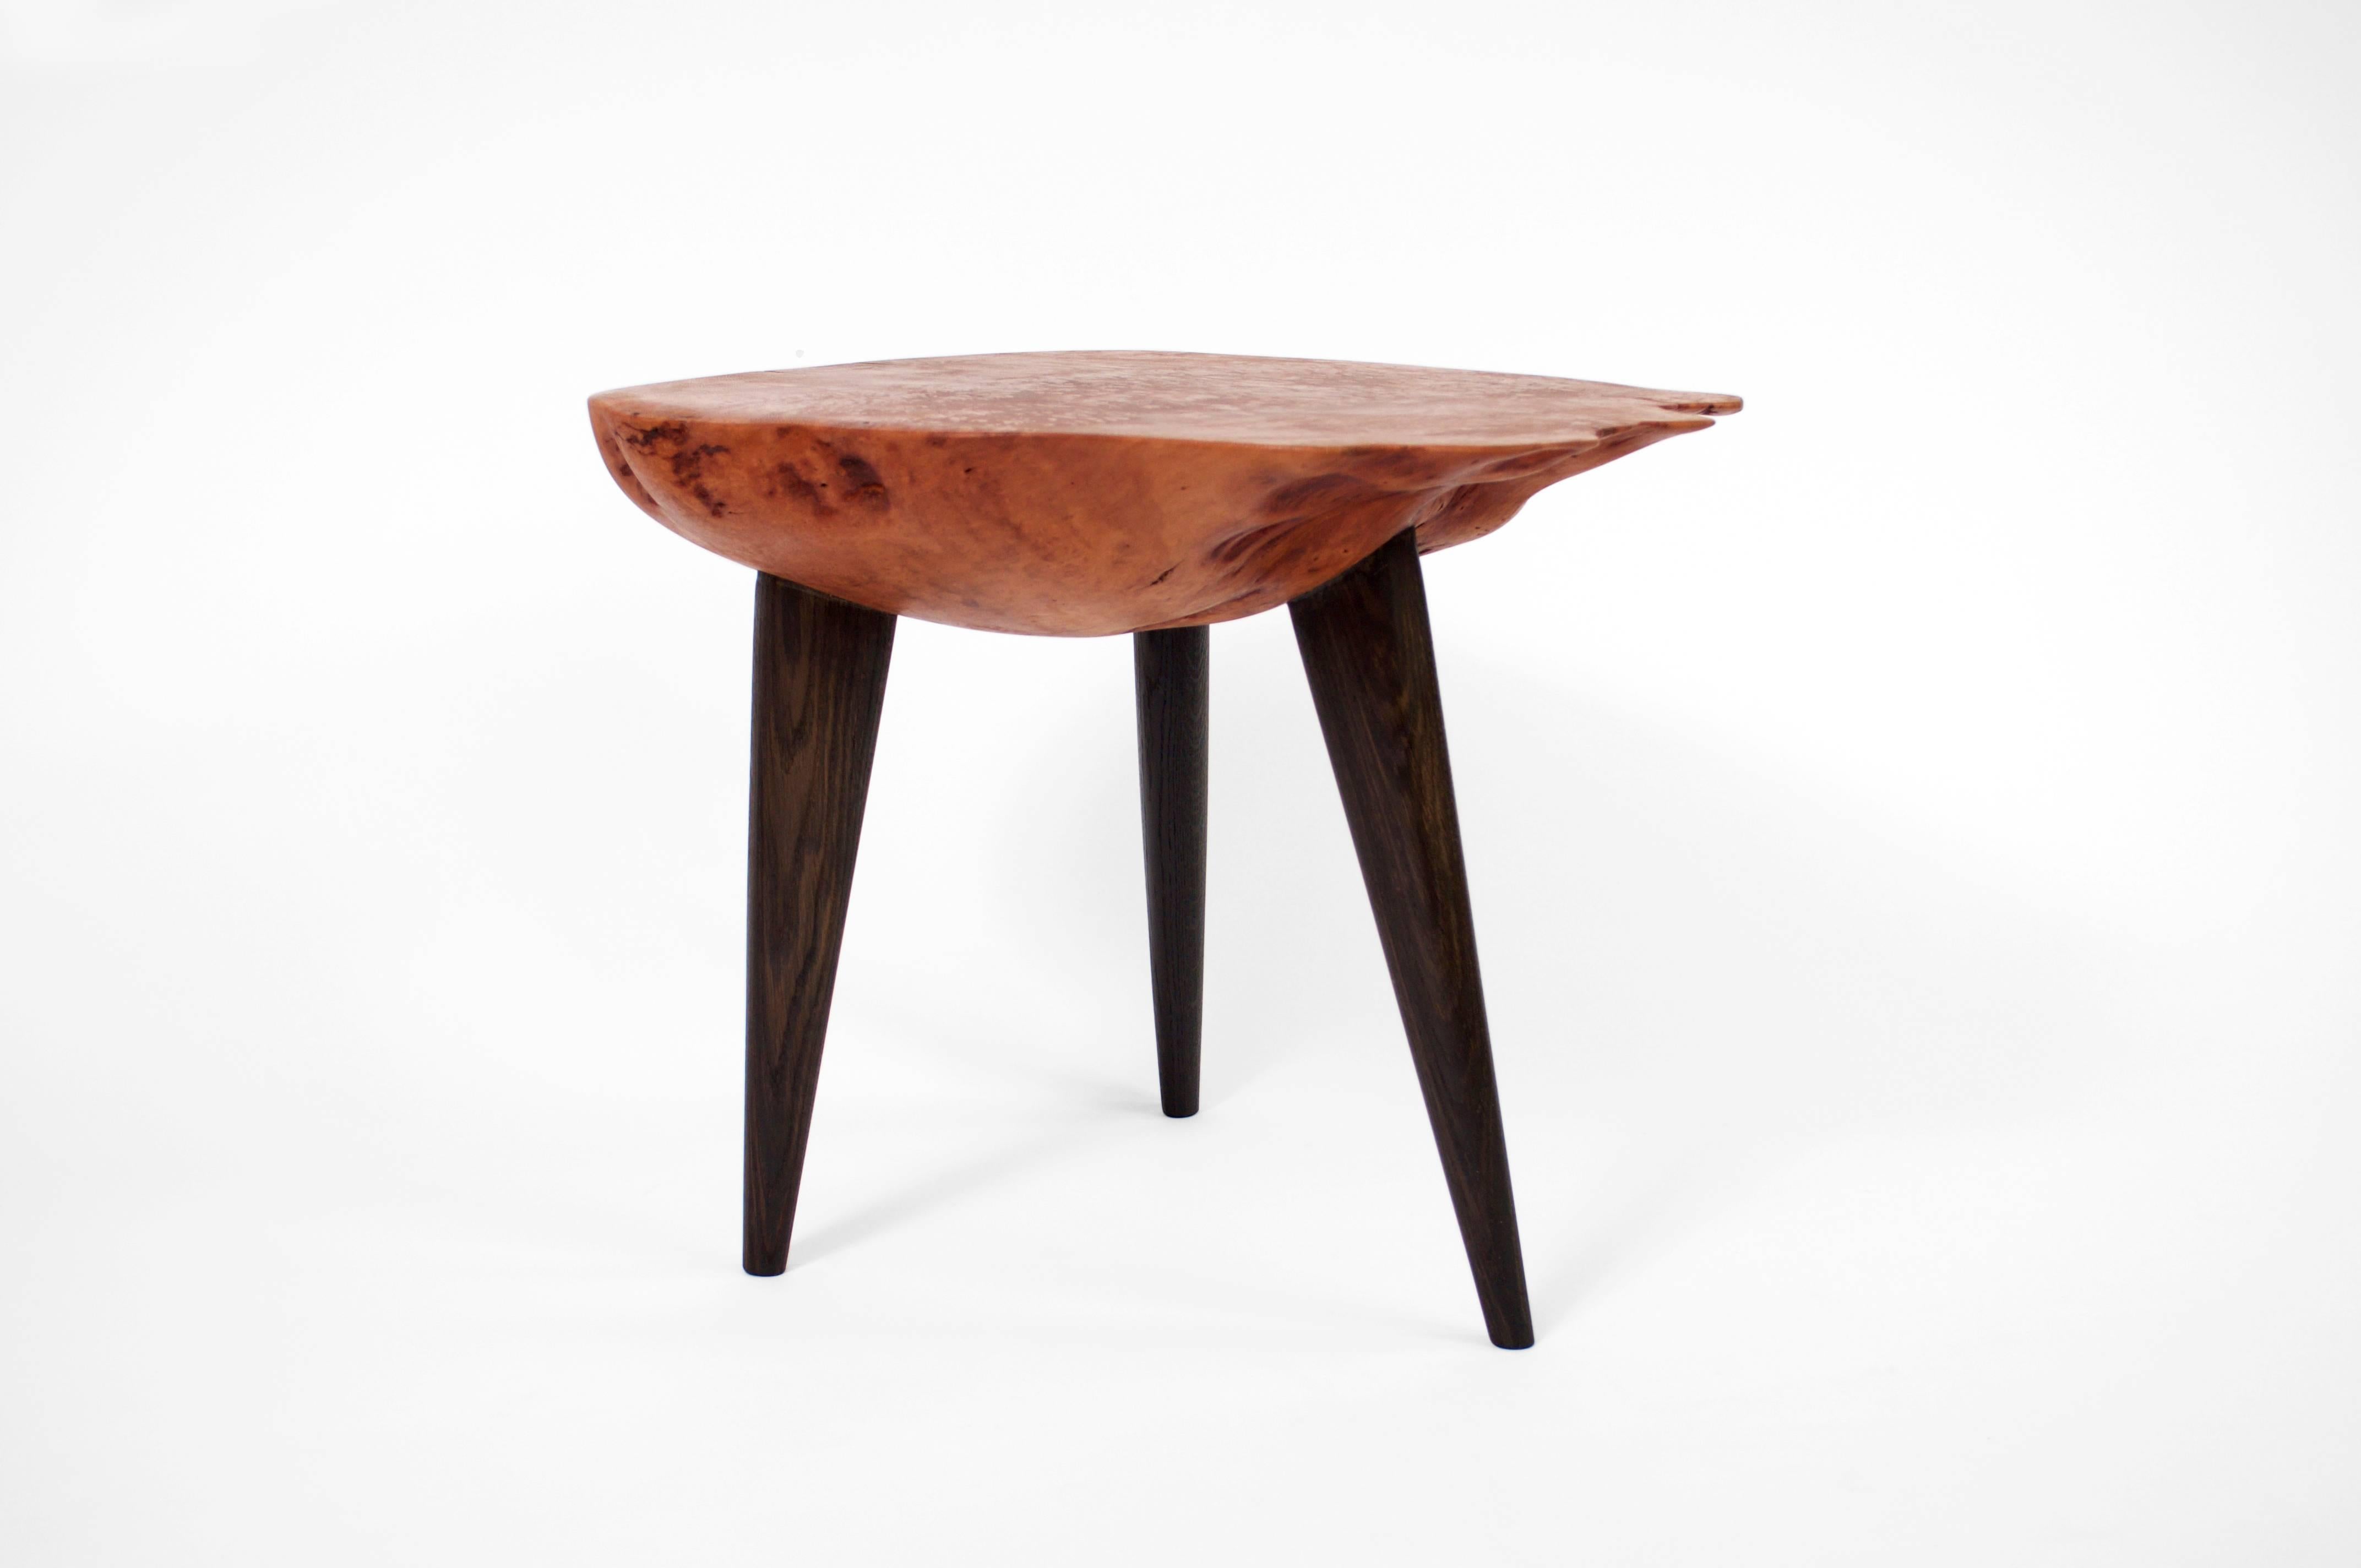 Unique signed table by Jörg Pietschmann
table · Sycamore, bog oak · T1295
Measures: H 47.5 W 58 x D 51 cm, tabletop 13 cm
Solid piece of beautiful grained and coloured sycamore with significant natural form.
Polished oil finish.


In